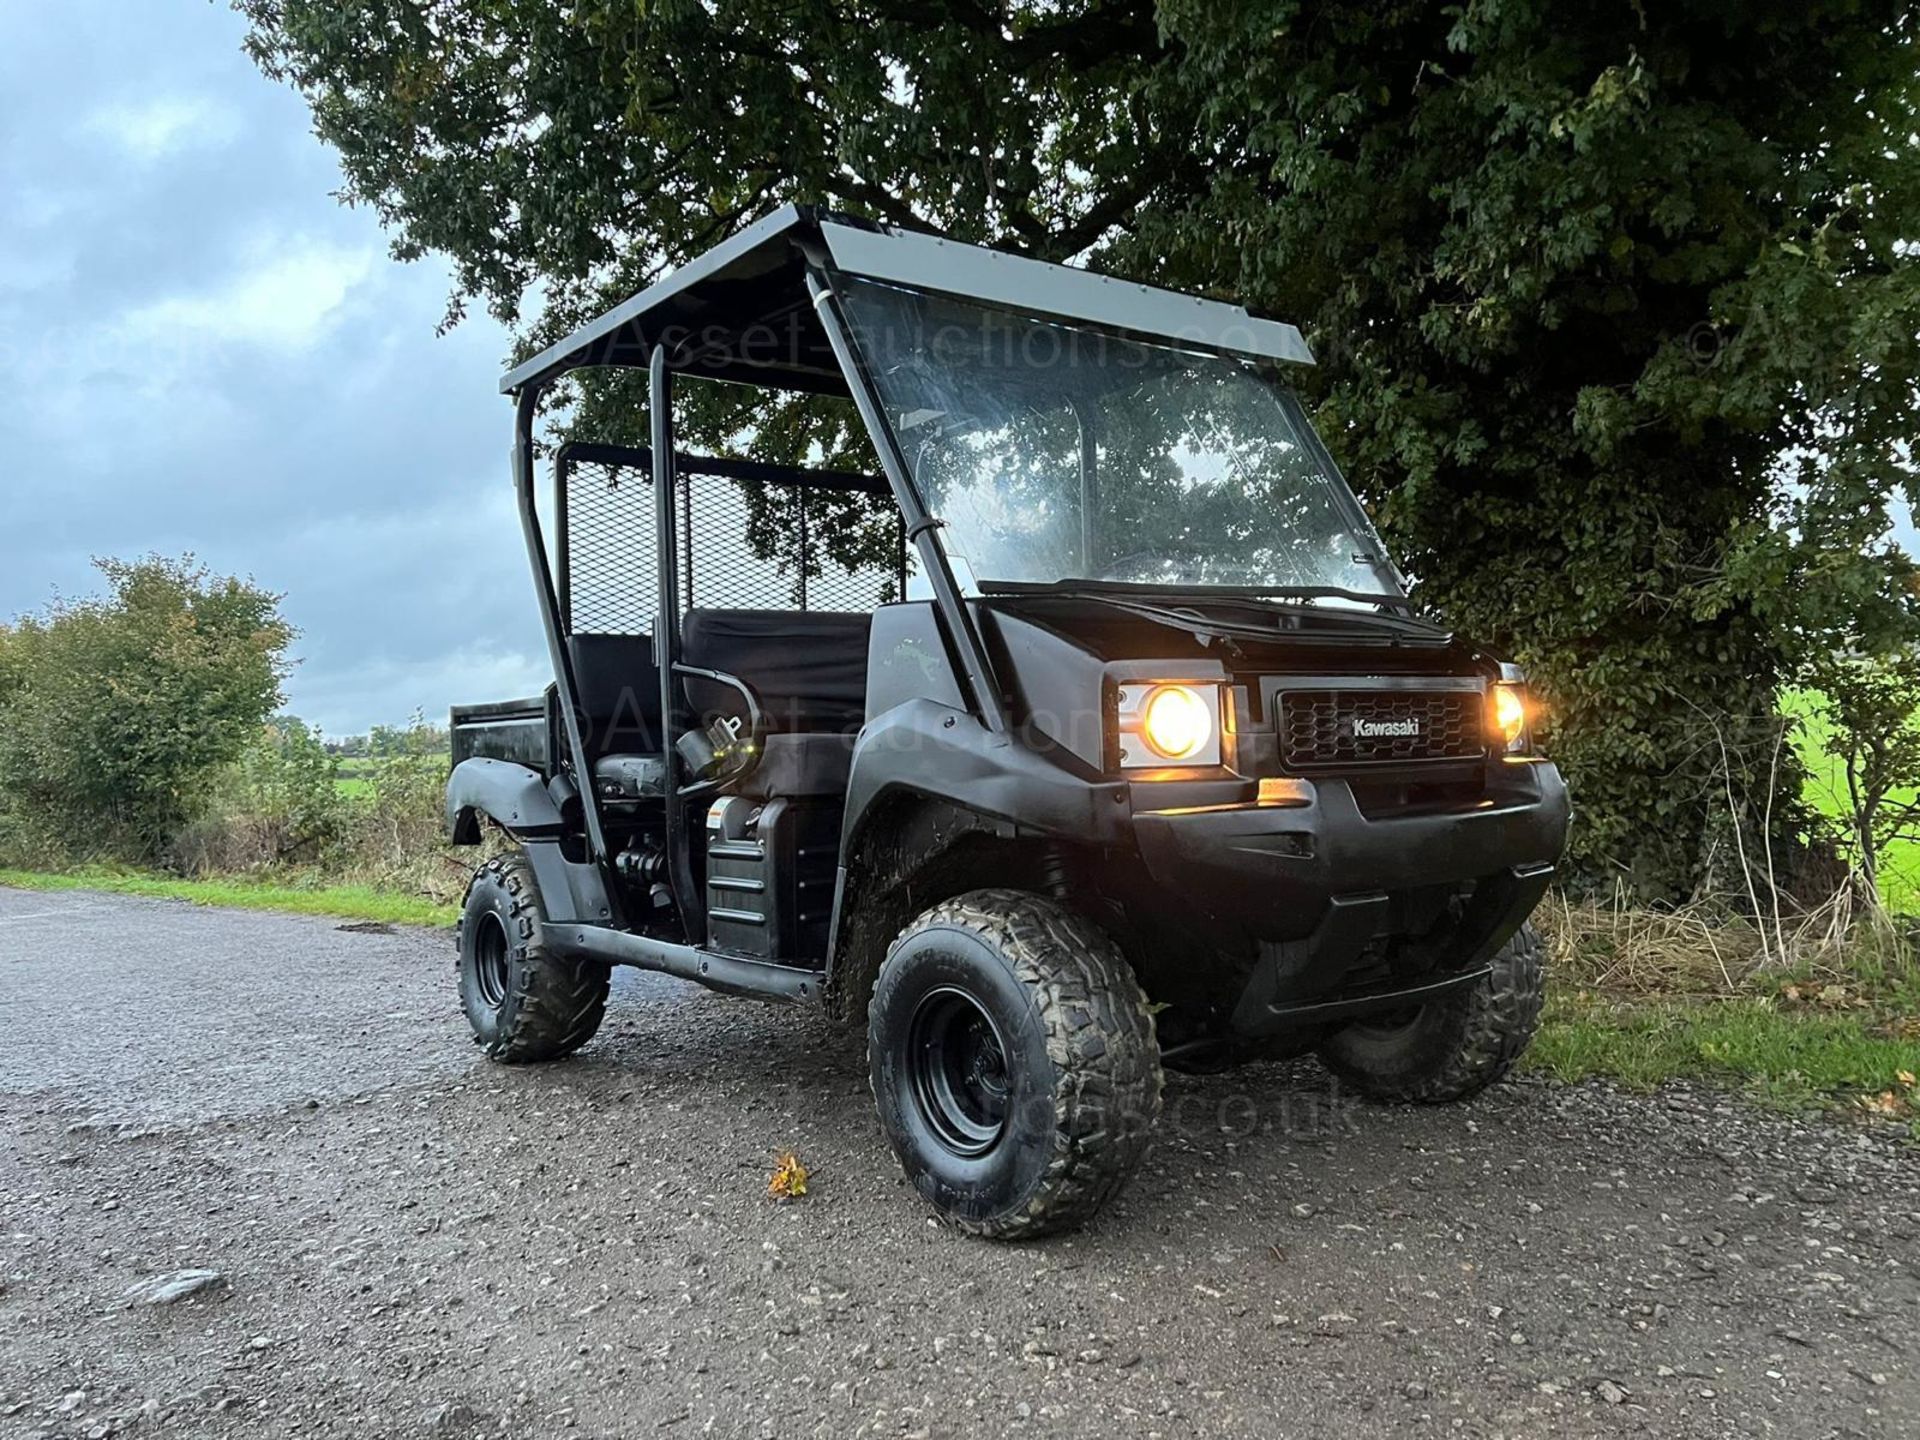 2011 KAWASAKI MULE 4010 4WD DIESEL BUGGI, RUNS AND DRIVES, SHOWING A LOW 2038 HOURS *PLUS VAT* - Image 8 of 19